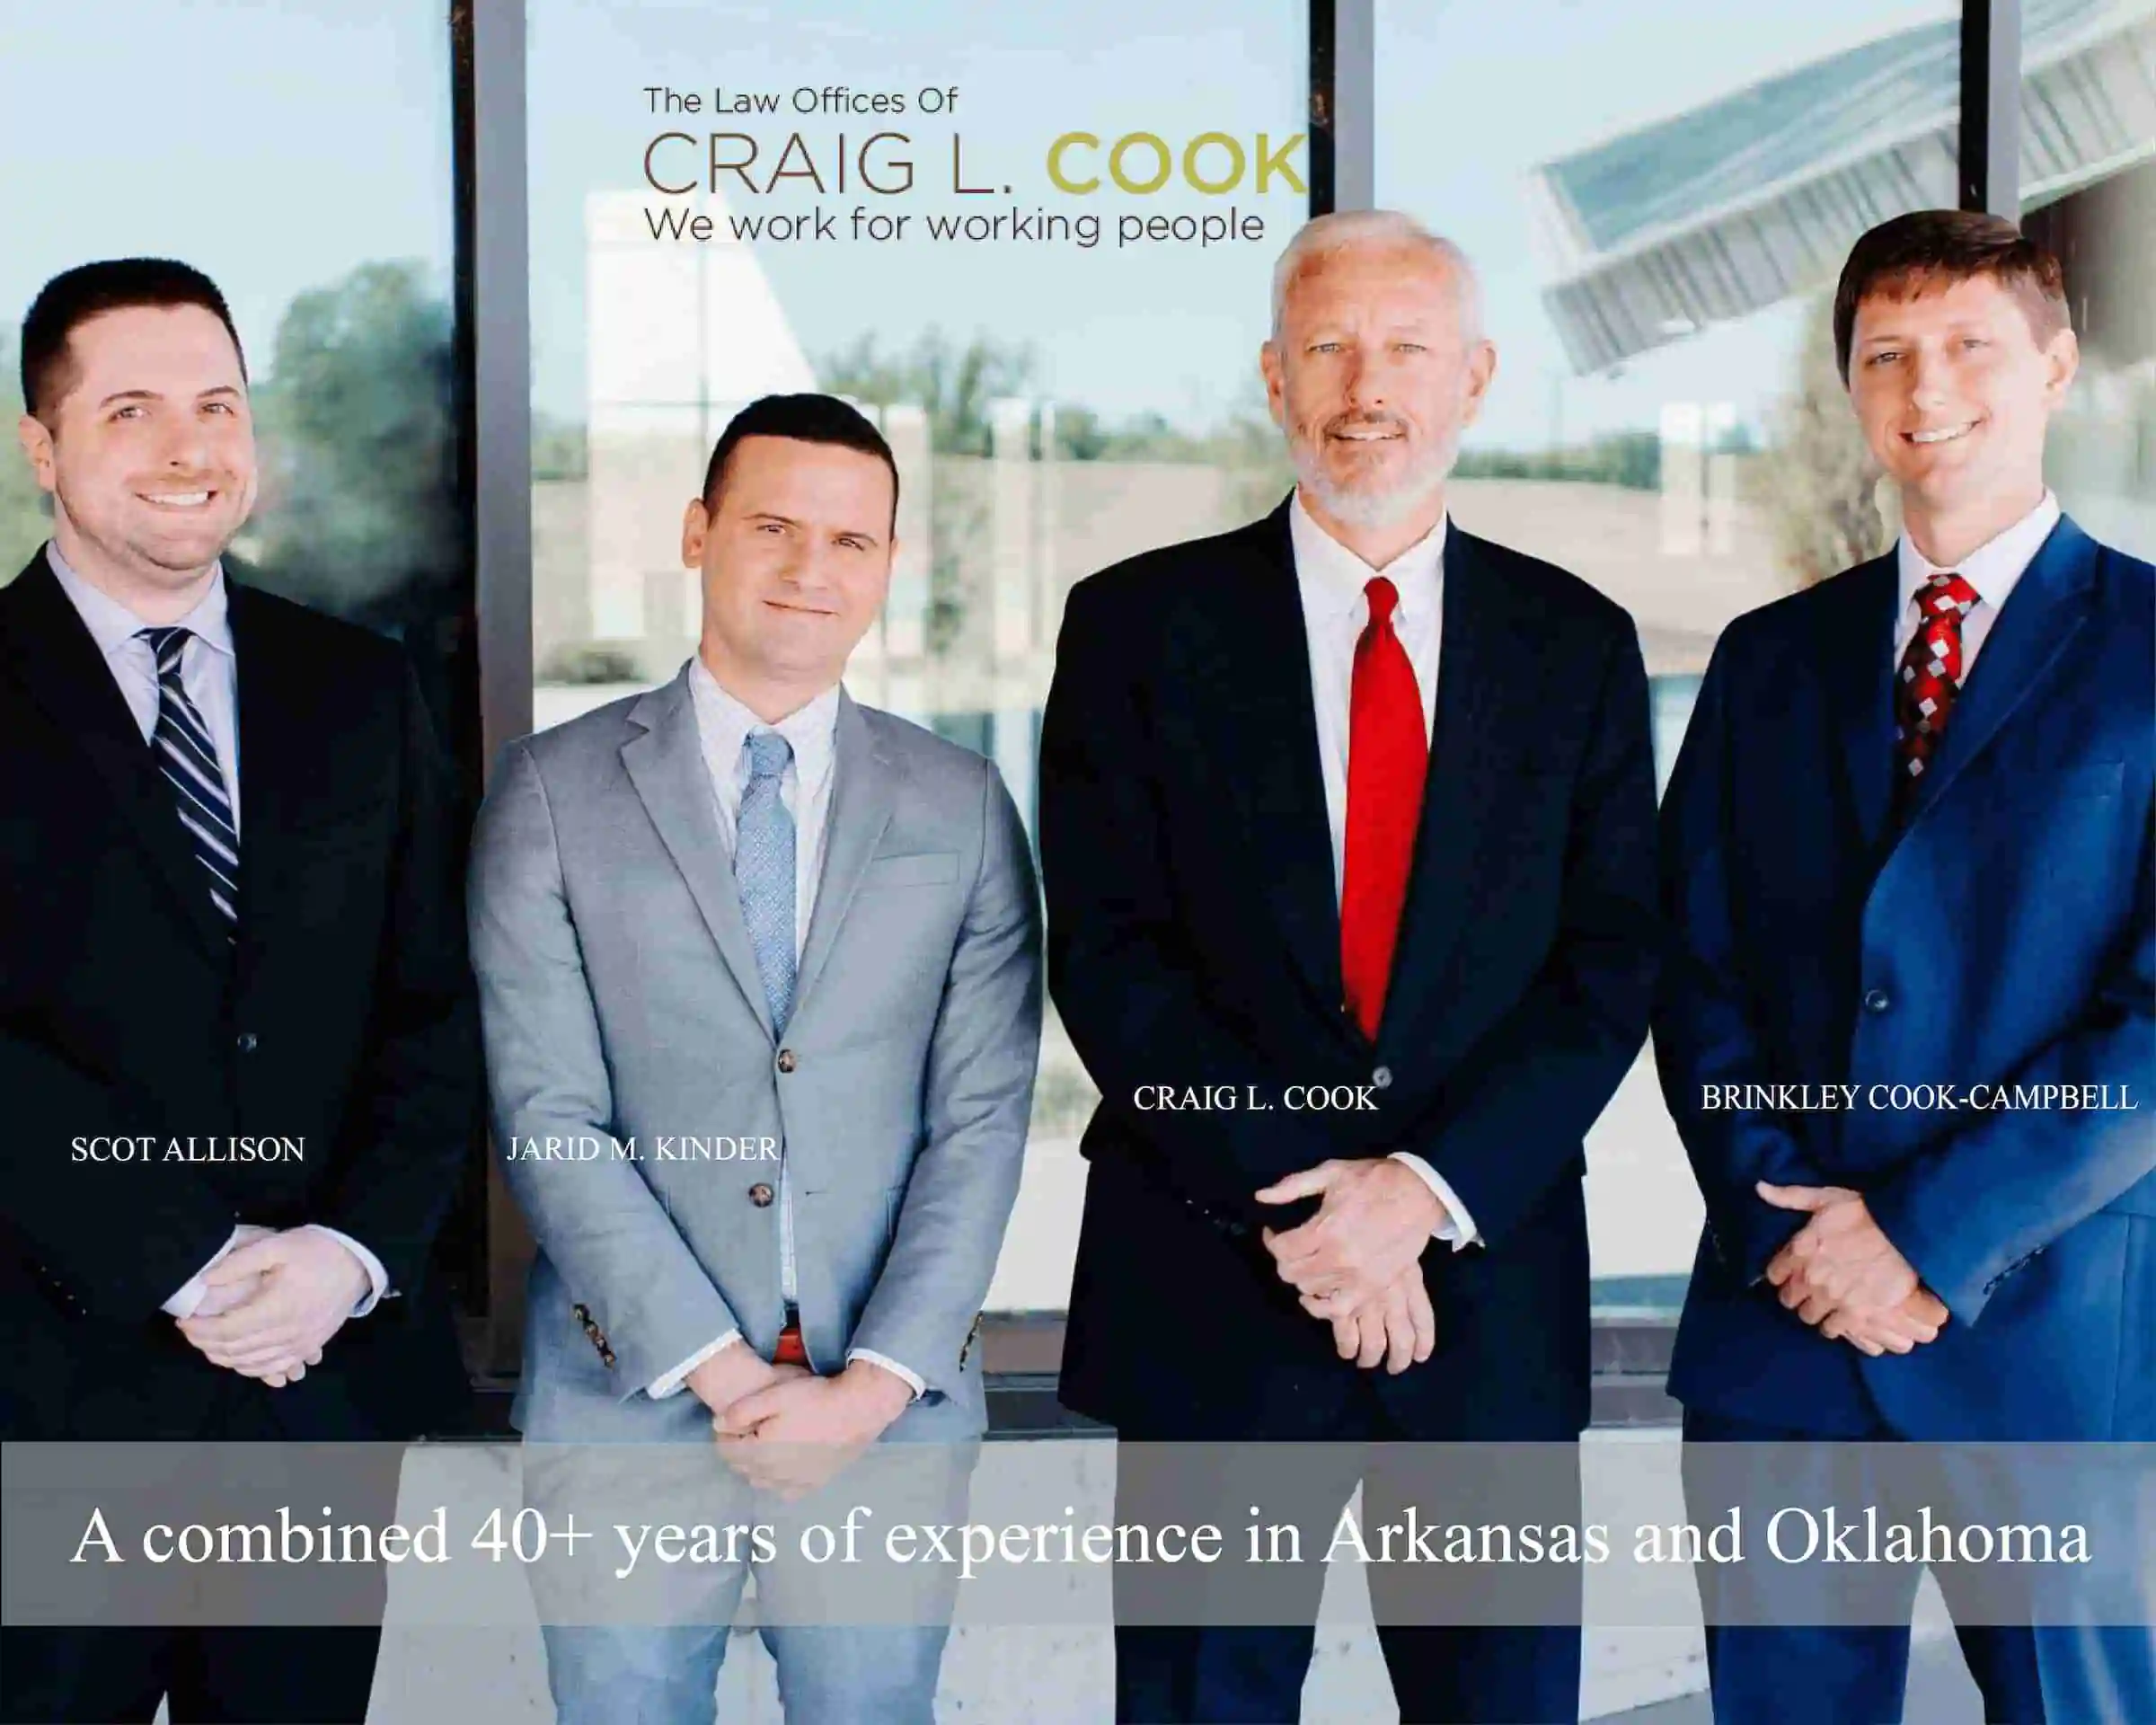 Scot Allison, Jarid Kinder, Criag Cook, and Brinkley Cook-Campbell have 40+ years of experience in Arkansas and Oklahoma